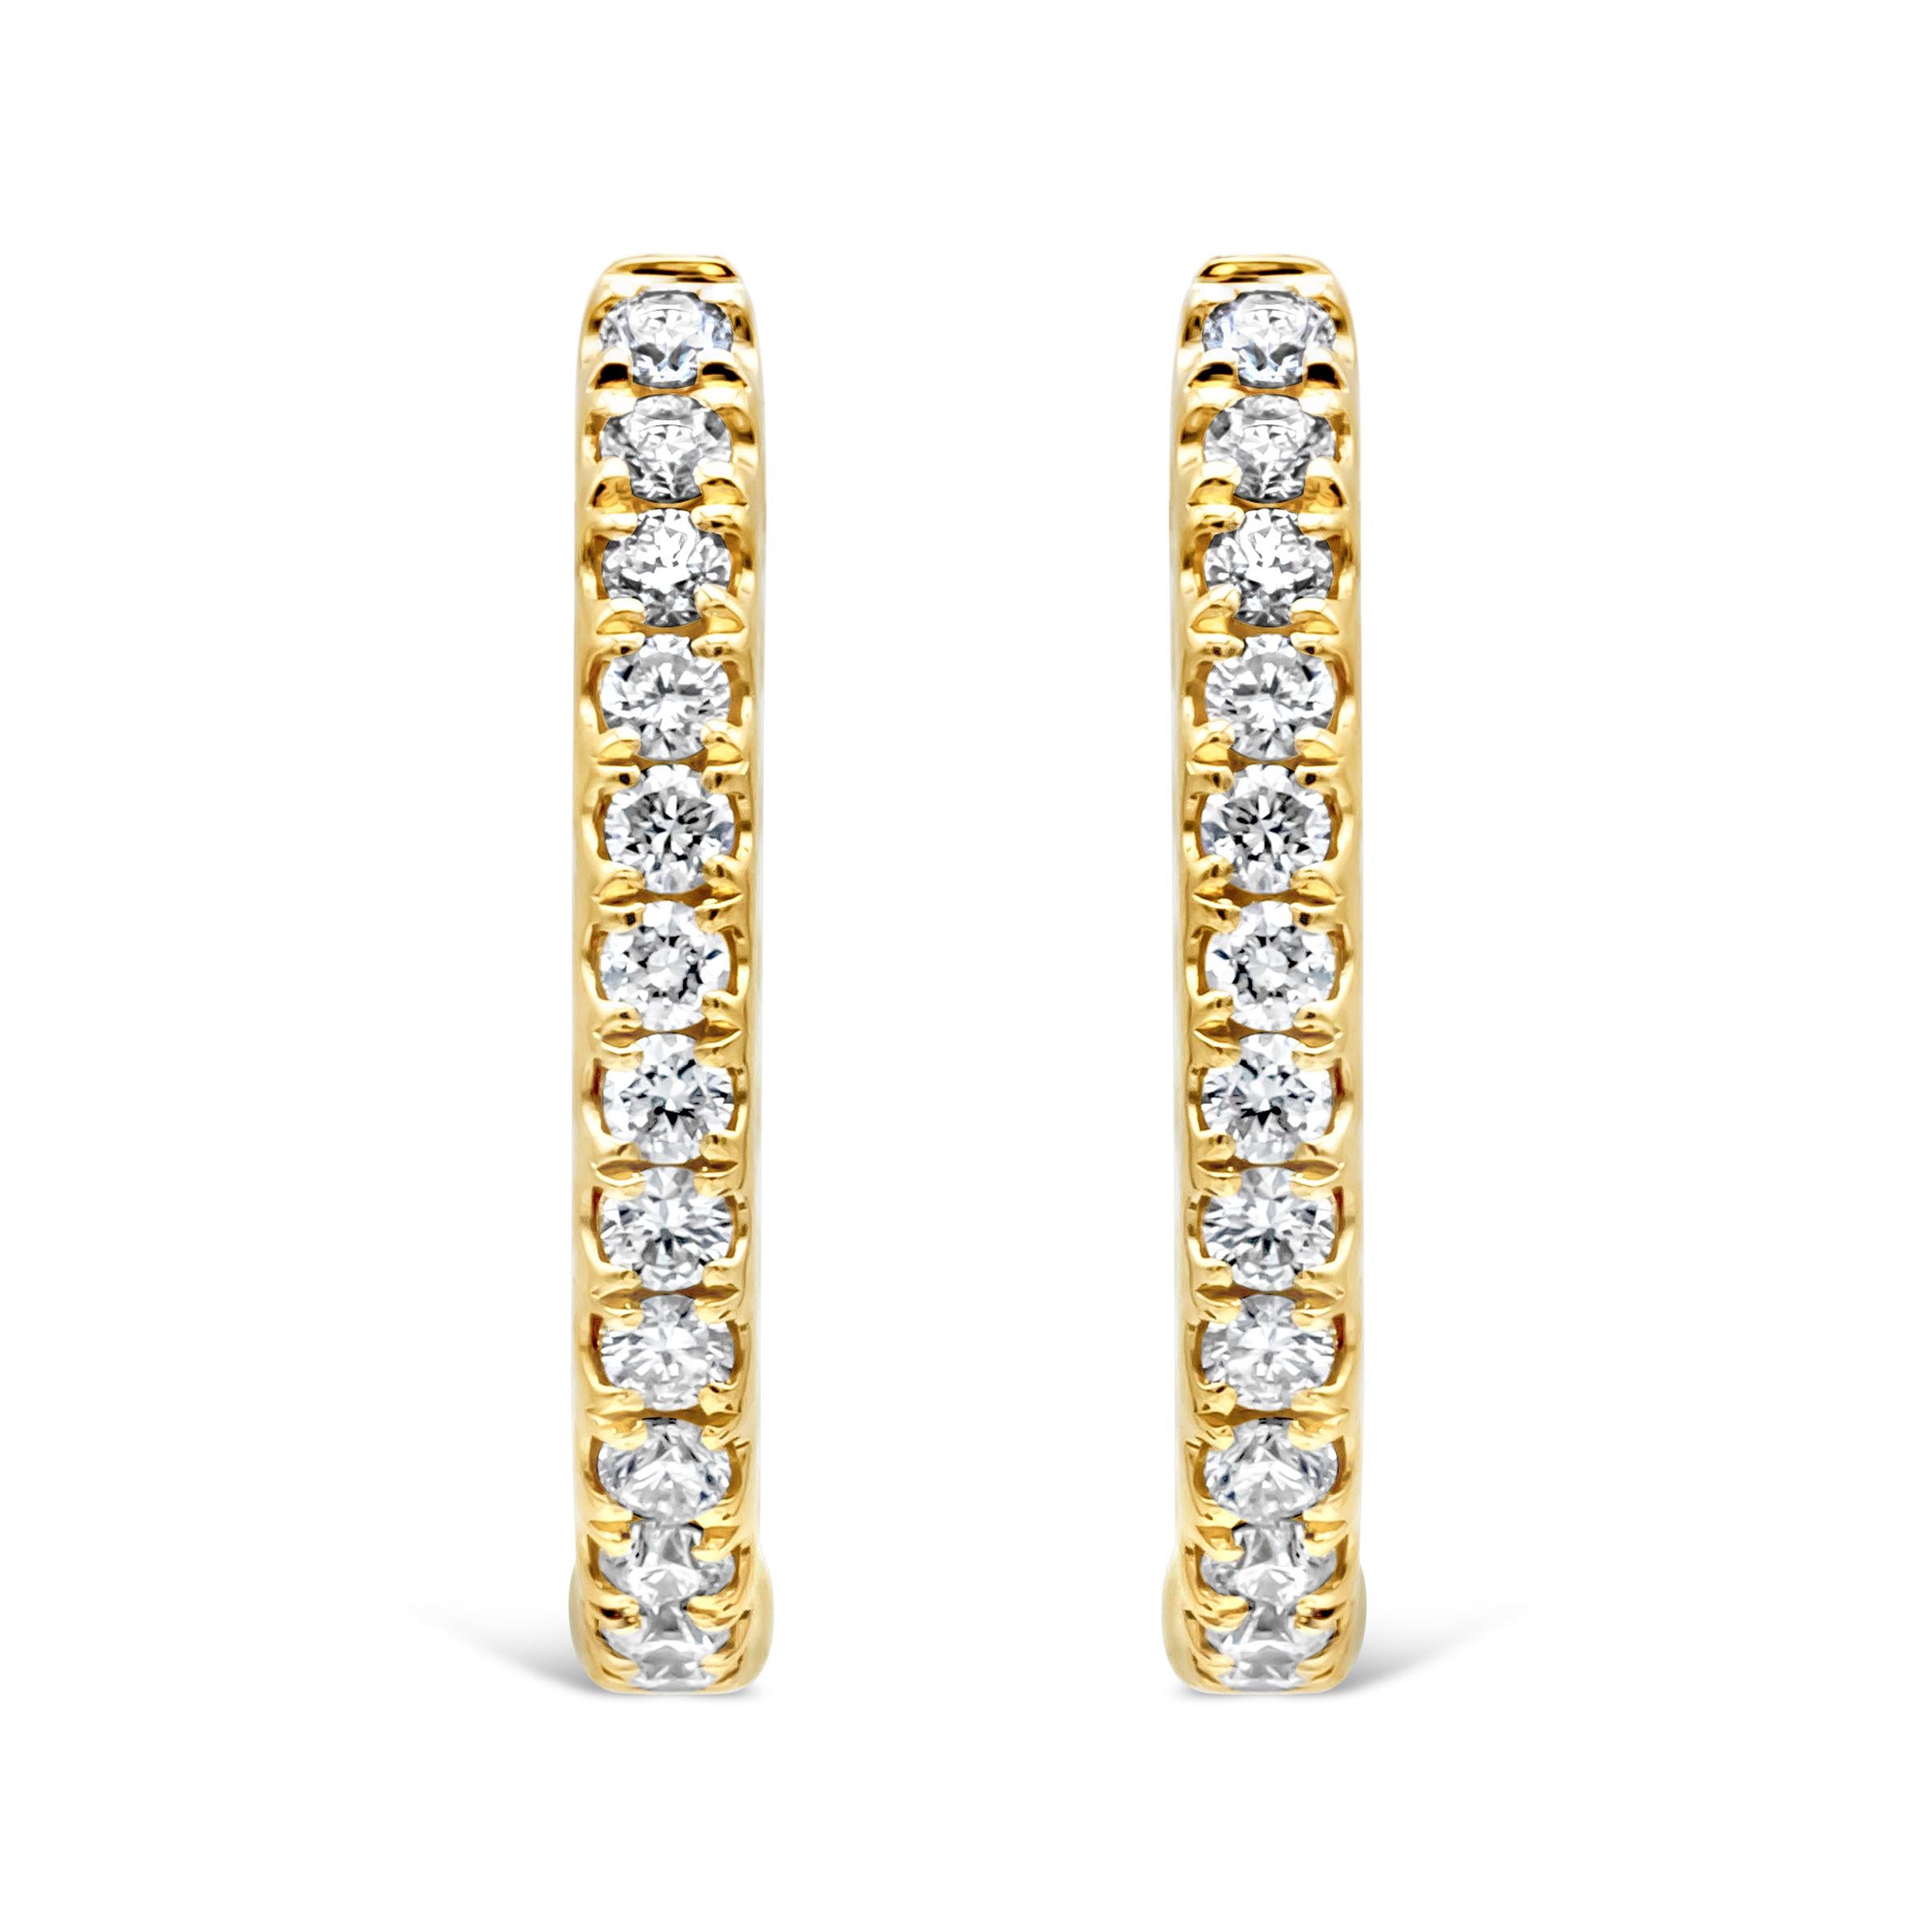 A classic style hoop earrings showcasing a 44 brilliant round shape diamond weighing 0.91 carats total, F-G color and VS-SI1 in clarity, set inside and out in a traditional four prong setting. Finely made in 18K Yellow Gold.

Style available in